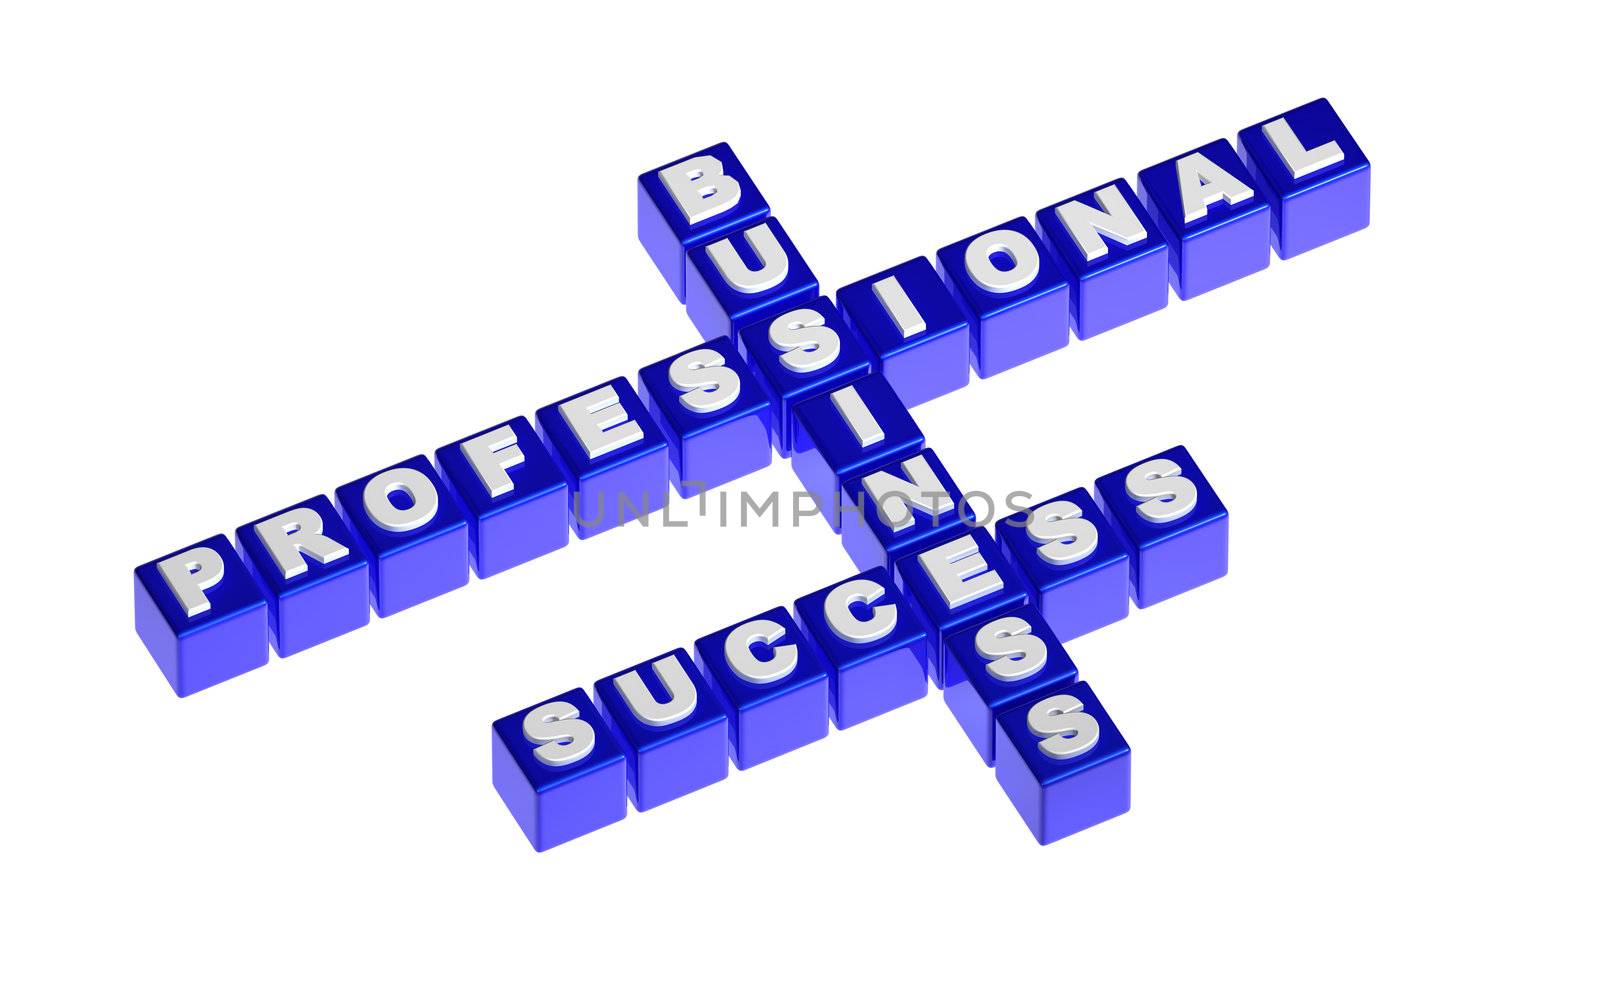 Blue cubes arranged in words business success professional